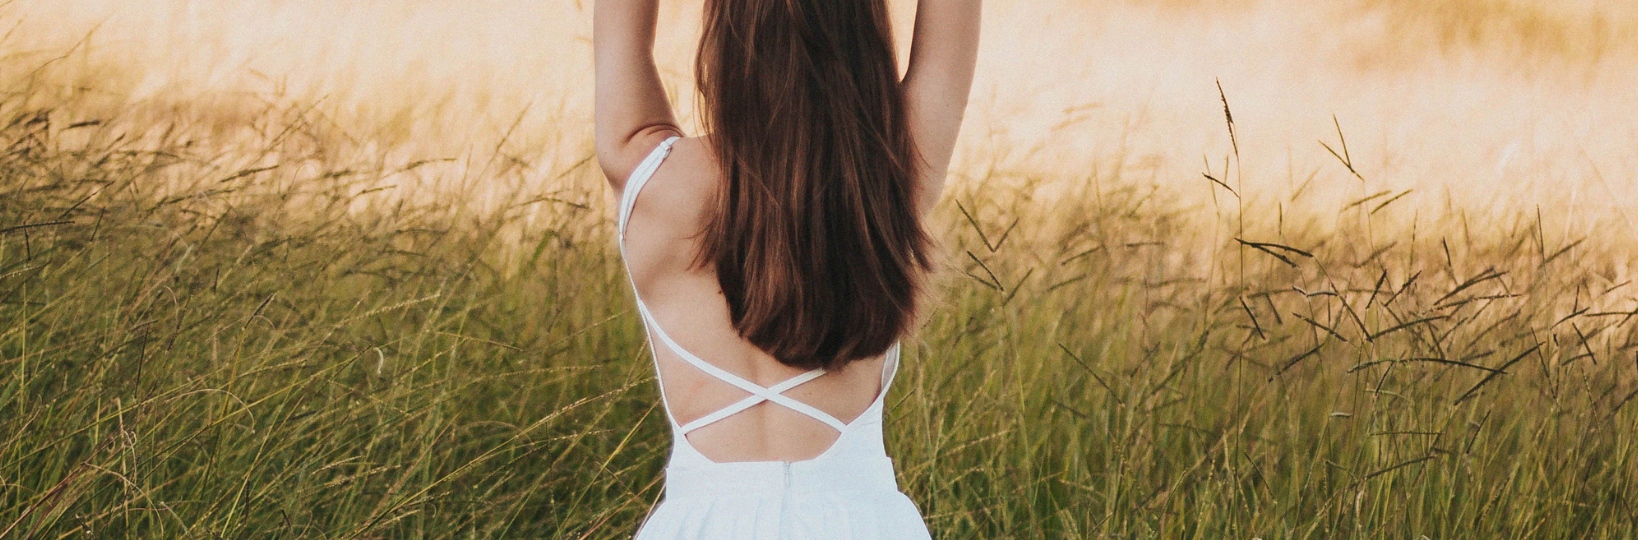 Bare back of woman with medium length brown hair in white dress on a grassy field.